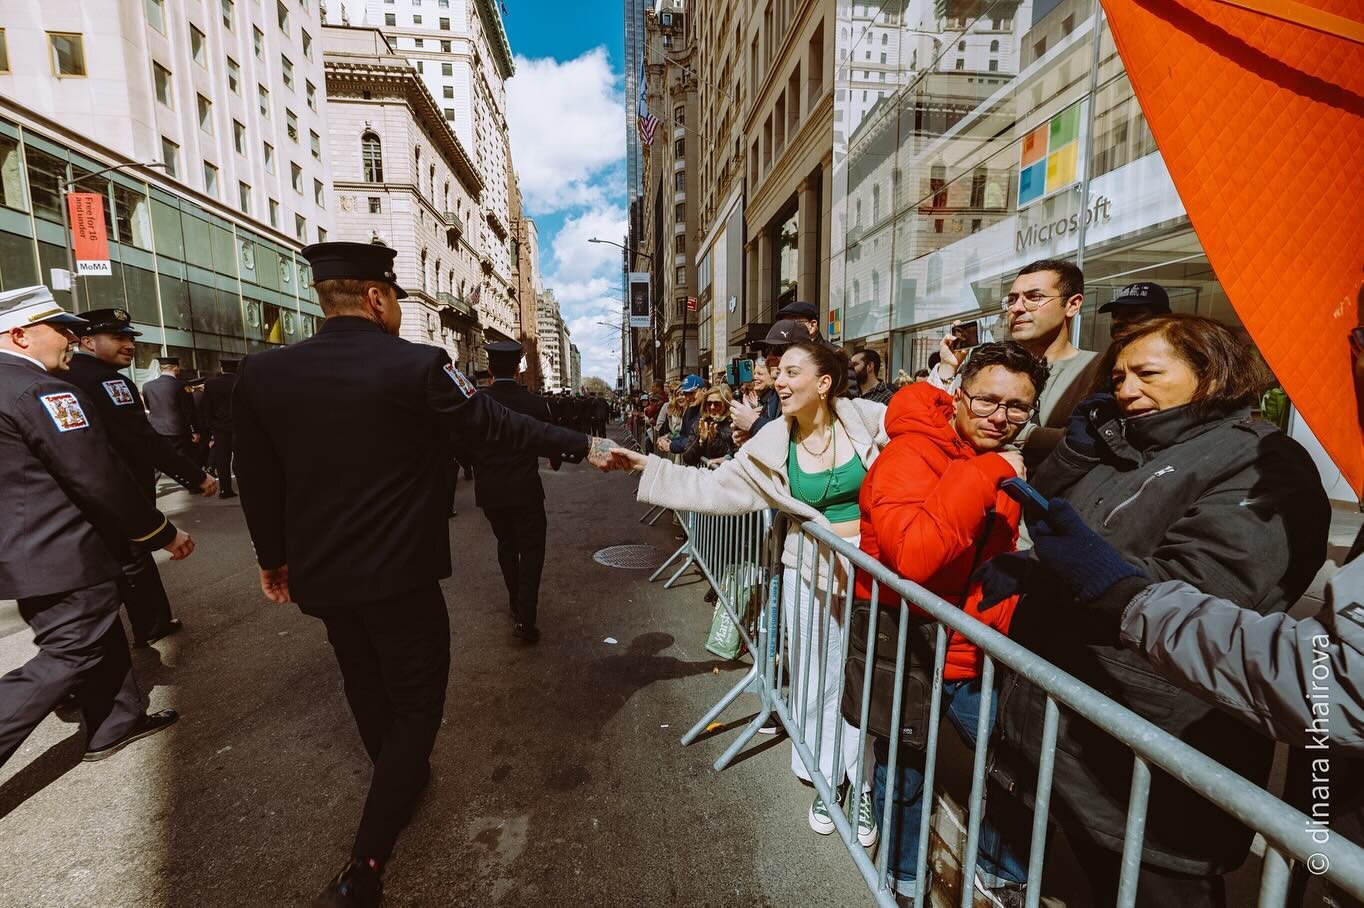 Flashback to the St. Patrick&rsquo;s Parade &lsquo;24 in New York ☘️☘️☘️

My work is my healing time❤️&zwj;🩹